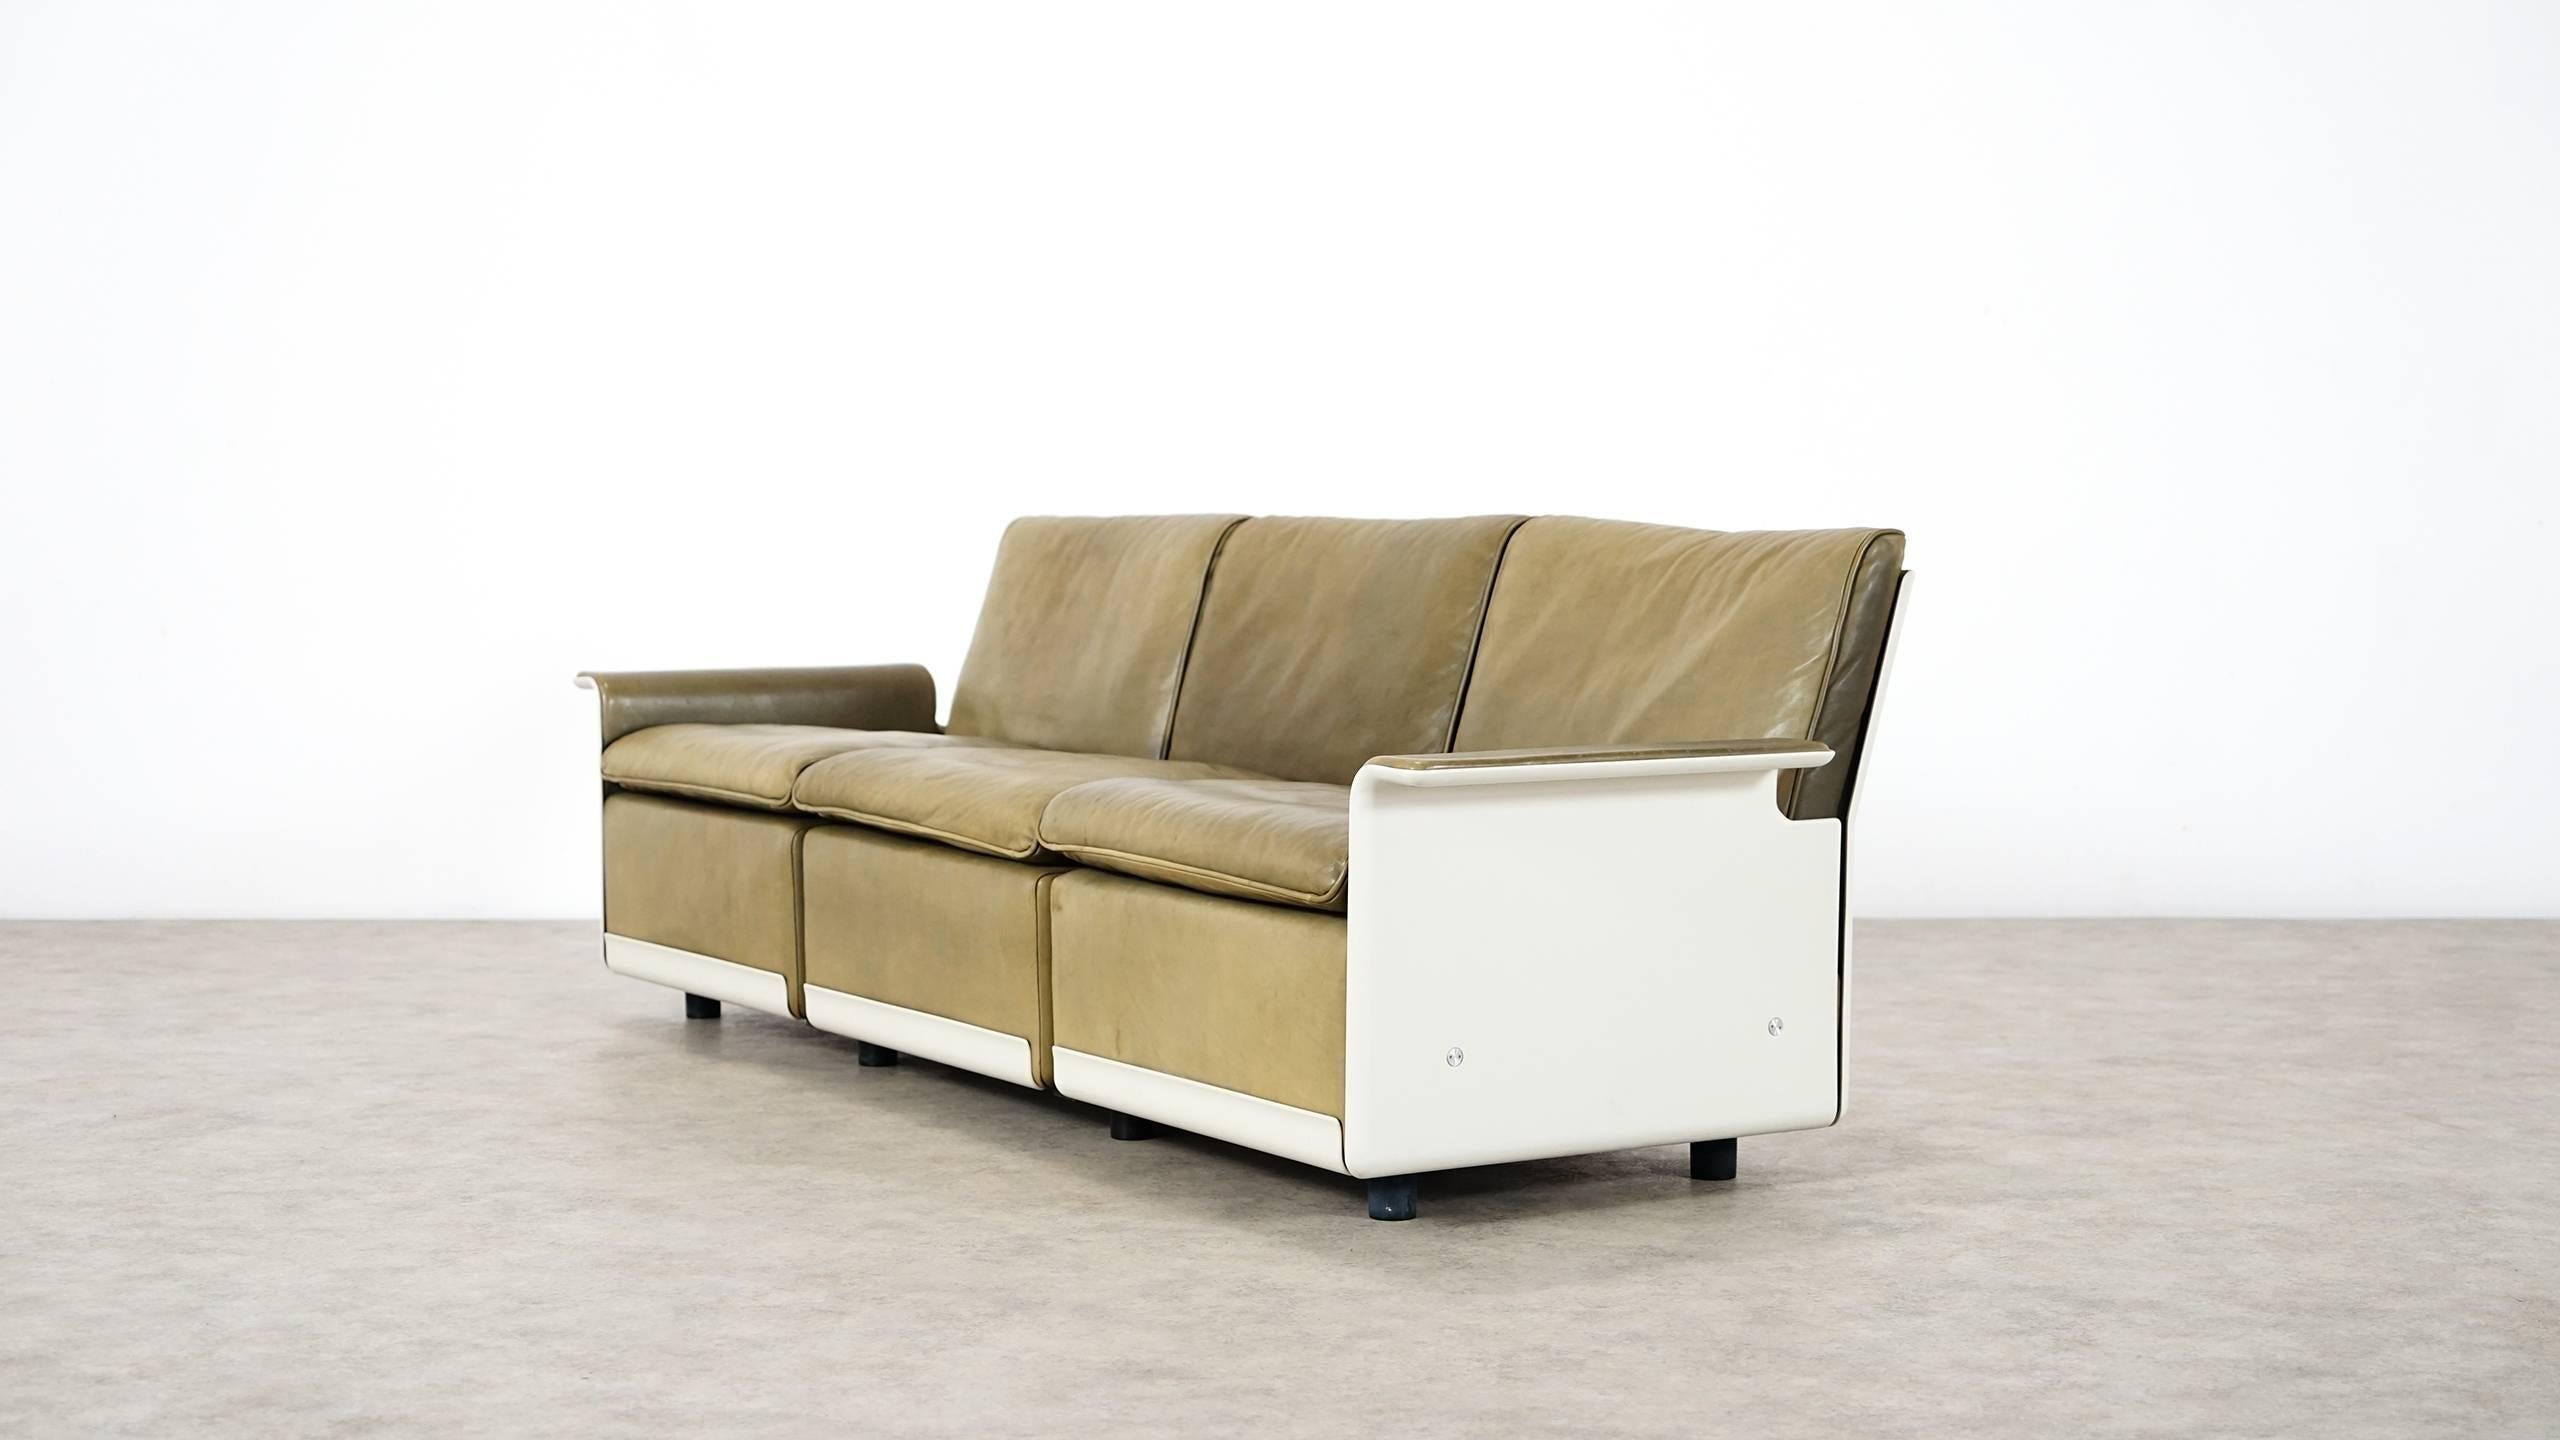 Dieter Rams Sofa and Stool RZ 62 in Olivgreen Leather by Vitsœ, Three-Seat 1